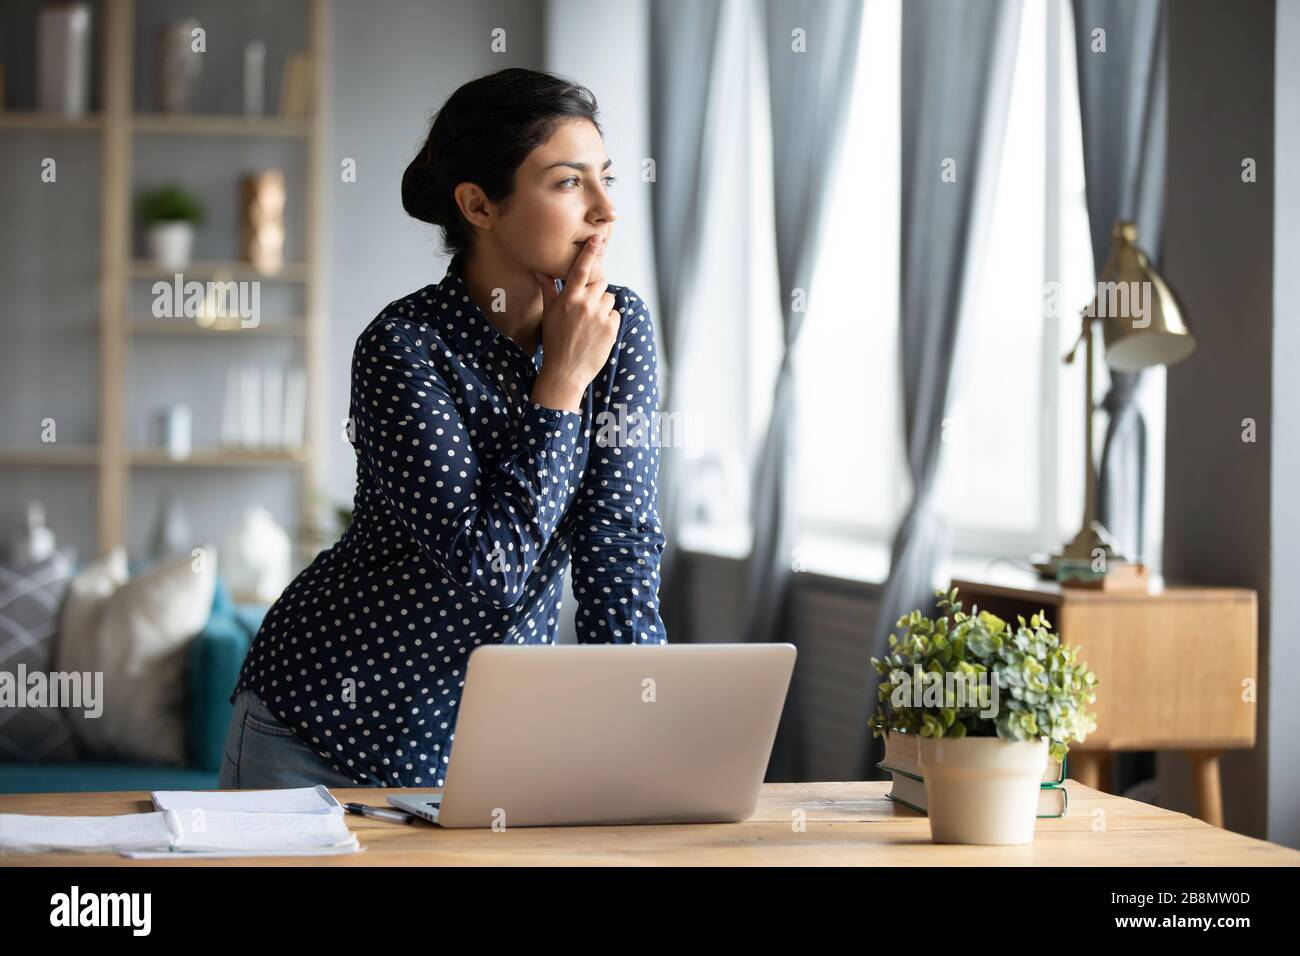 Thoughtful Indian woman standing at desk, pondering task Stock Photo